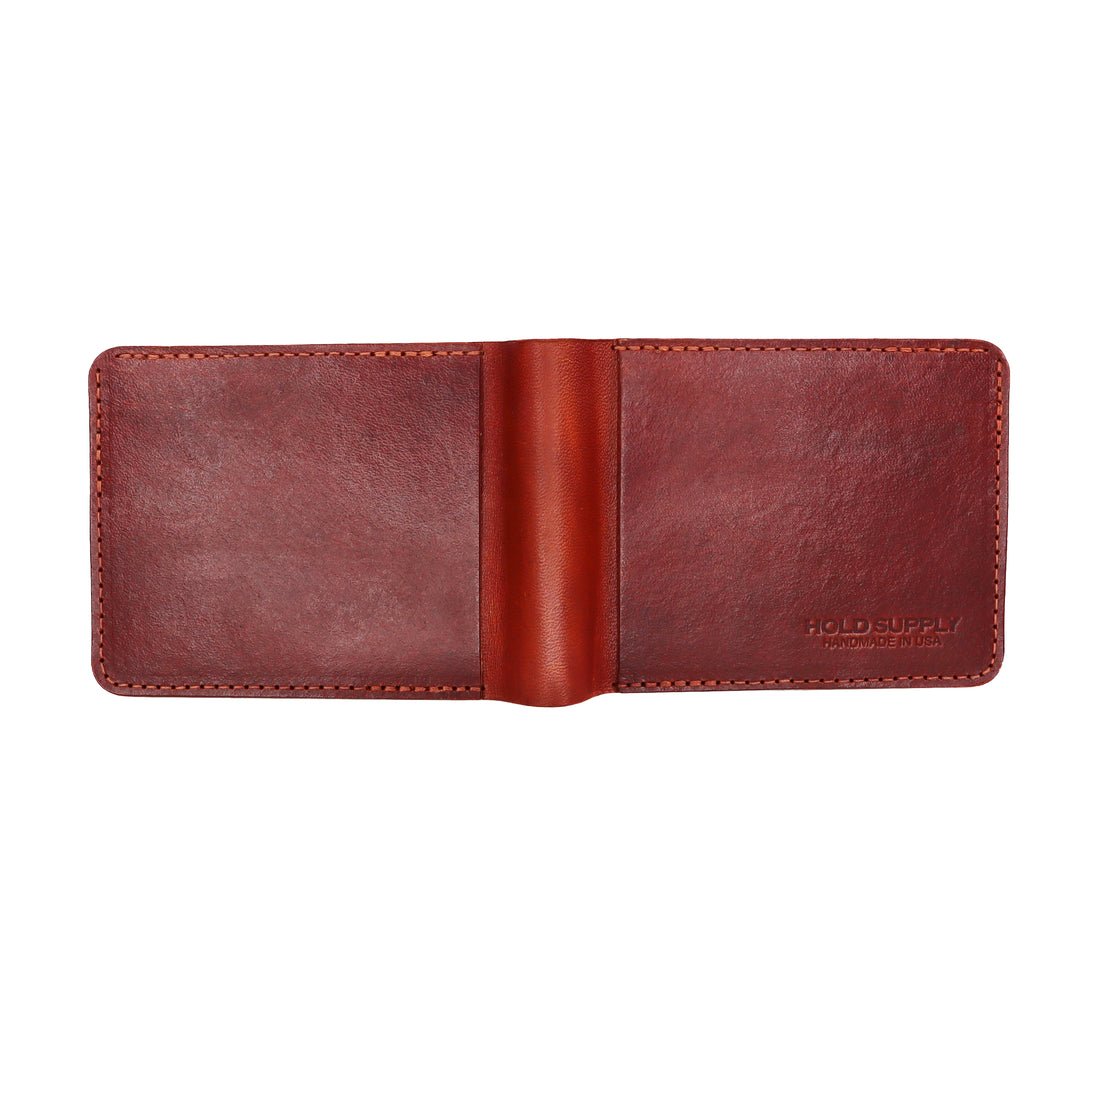 The exterior of a a brown leather bi-fold wallet. The Leather Bi-Fold Wallet in Brown is designed and handcrafted by Hold Supply in Anaheim, California.